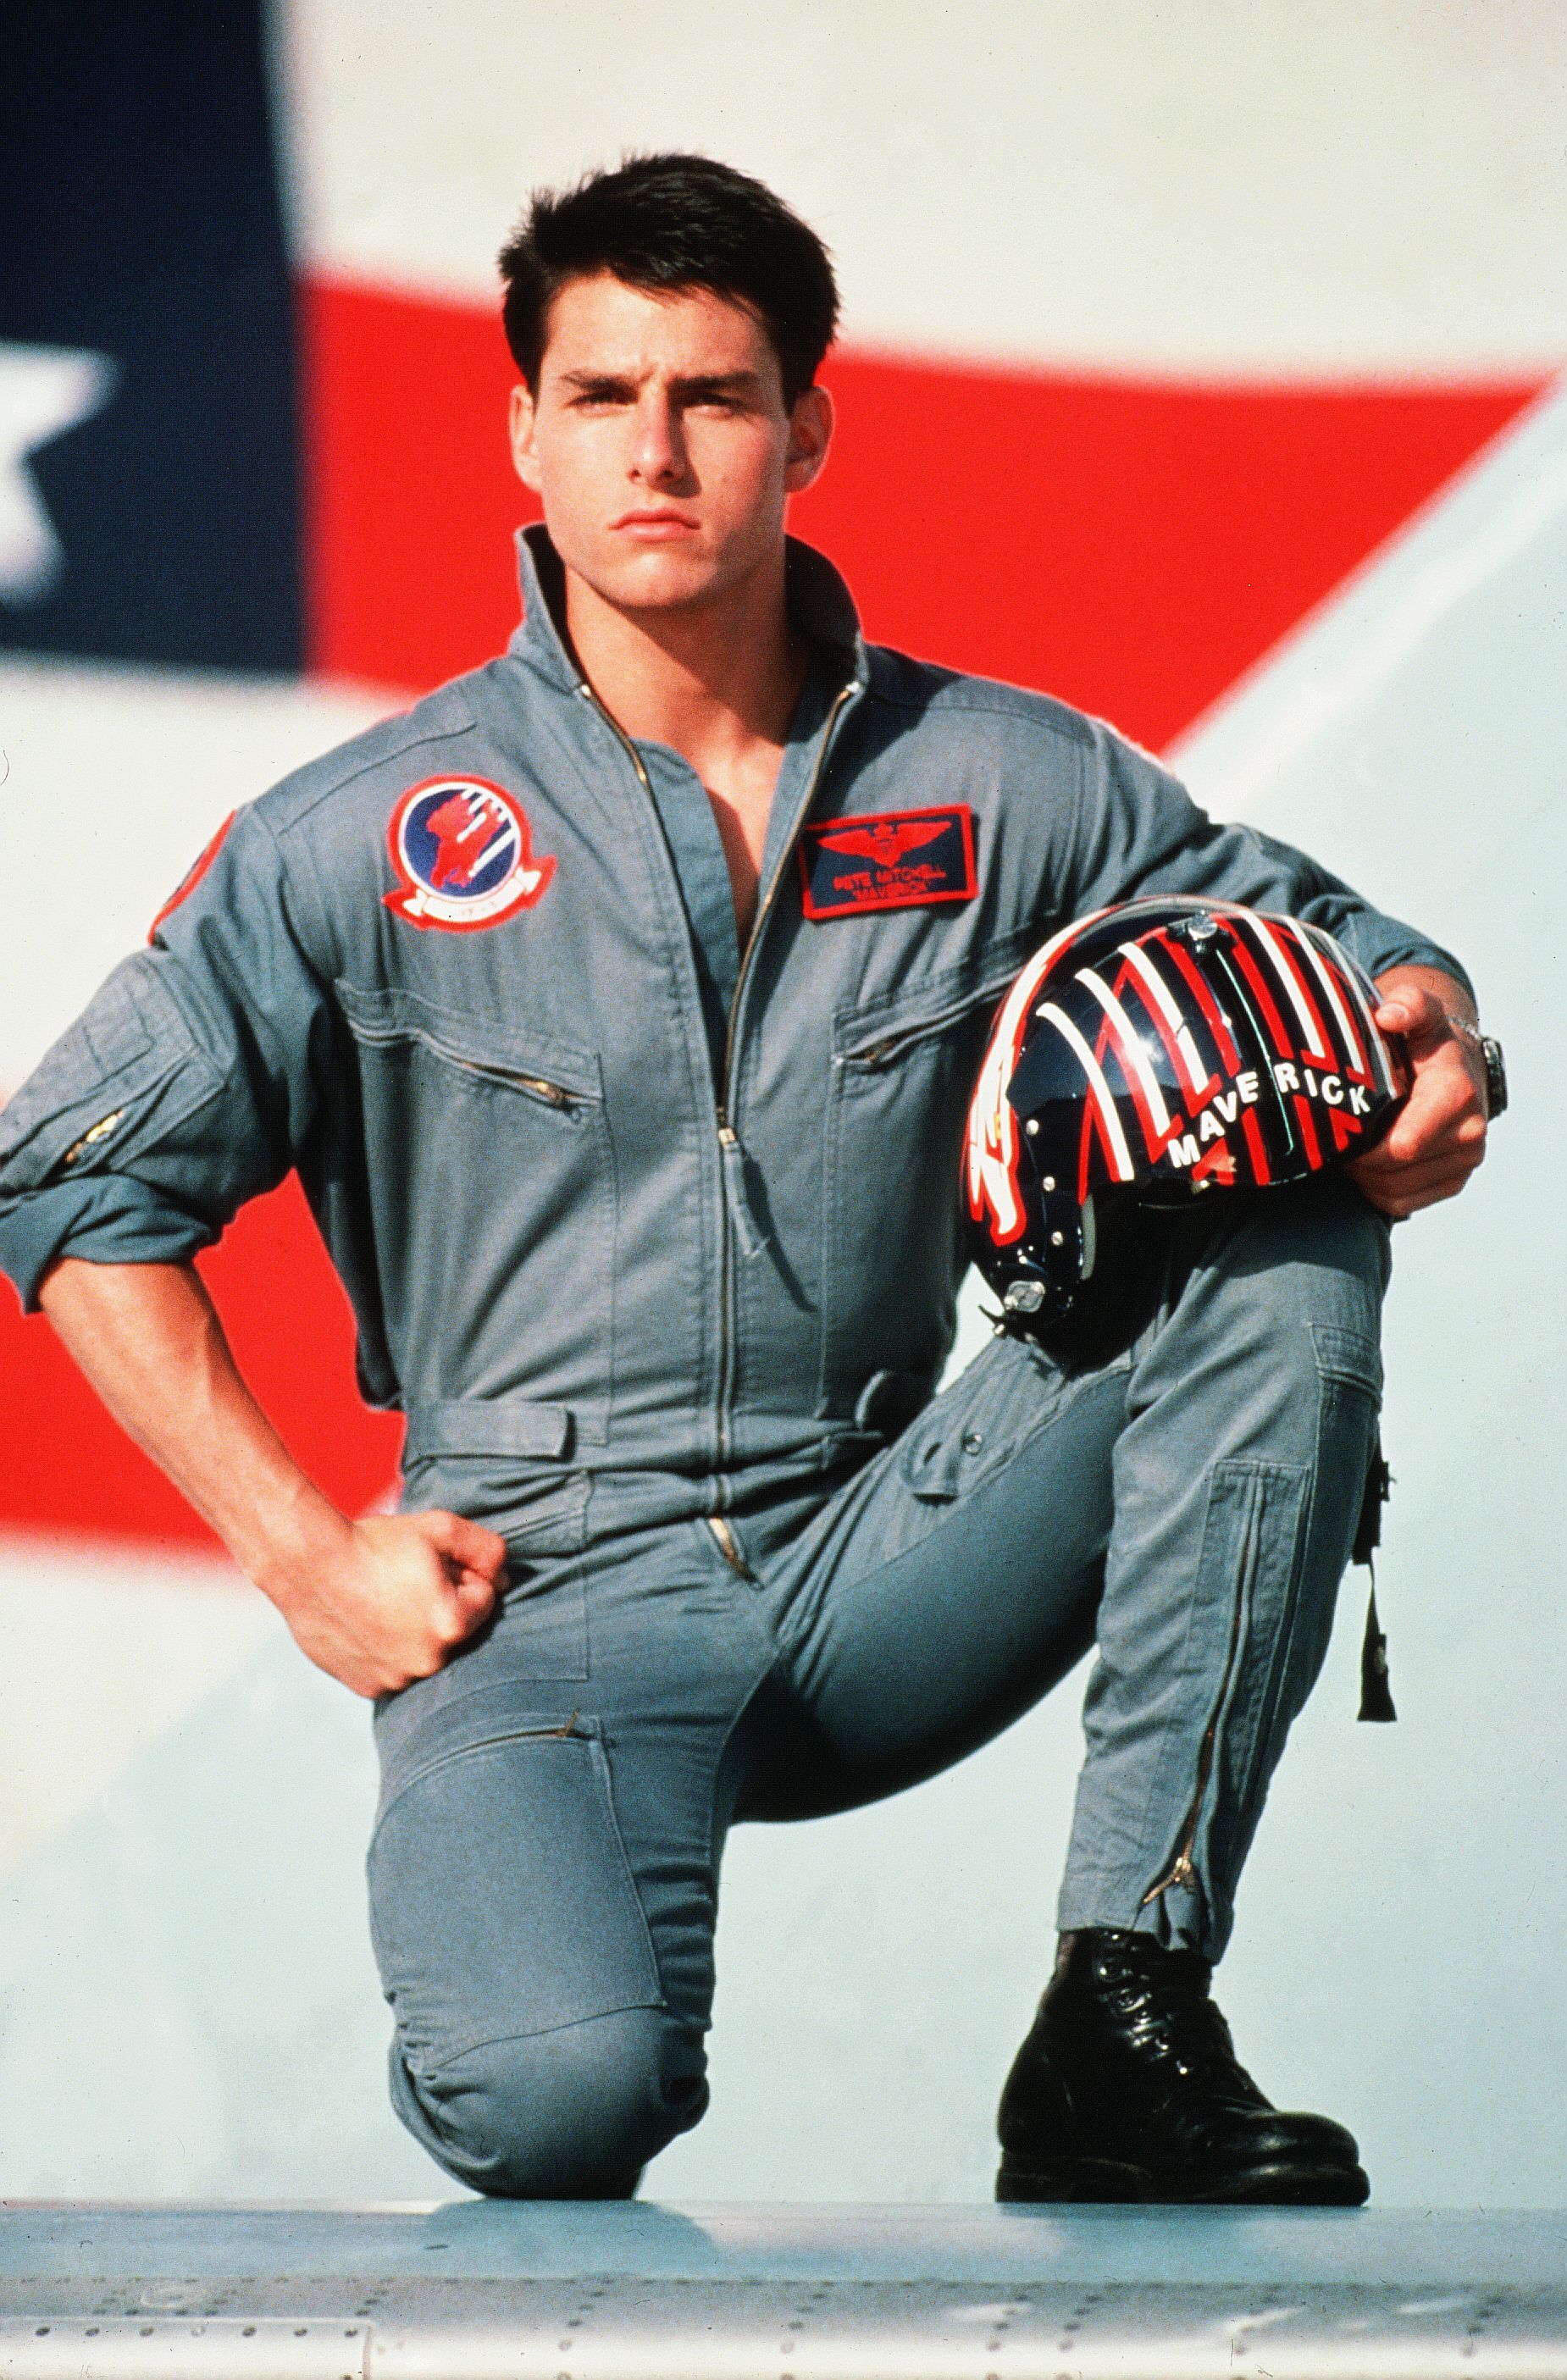 <p>Tom Cruise truly achieved superstar status when he played naval aviator Lieutenant Pete "Maverick" Mitchell in 1986's "Top Gun." The action flick was a huge blockbuster that grossed more than $356 million at the box office. Nearly 30 years after its release, "Top Gun" was selected by the U.S. Library of Congress for preservation in the National Film Registry after being deemed "culturally, historically or aesthetically significant." The film inspired a critically acclaimed sequel, "Top Gun: Maverick," that was released 36 years after the original.</p>